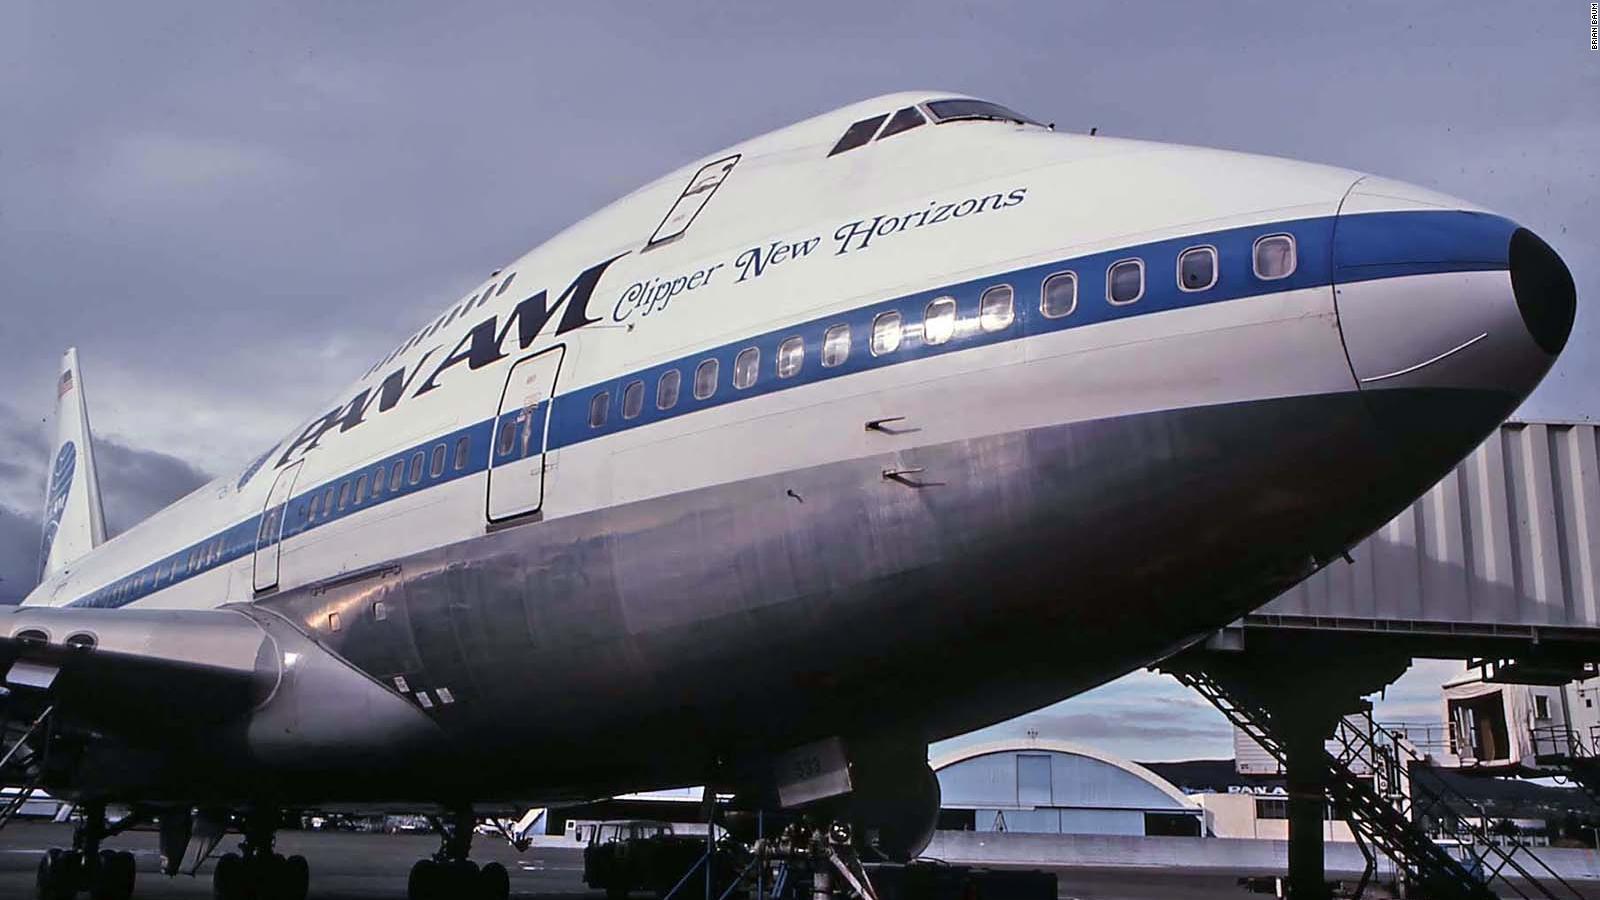 Fly with Pan Am from North Pole to South pole in 1977